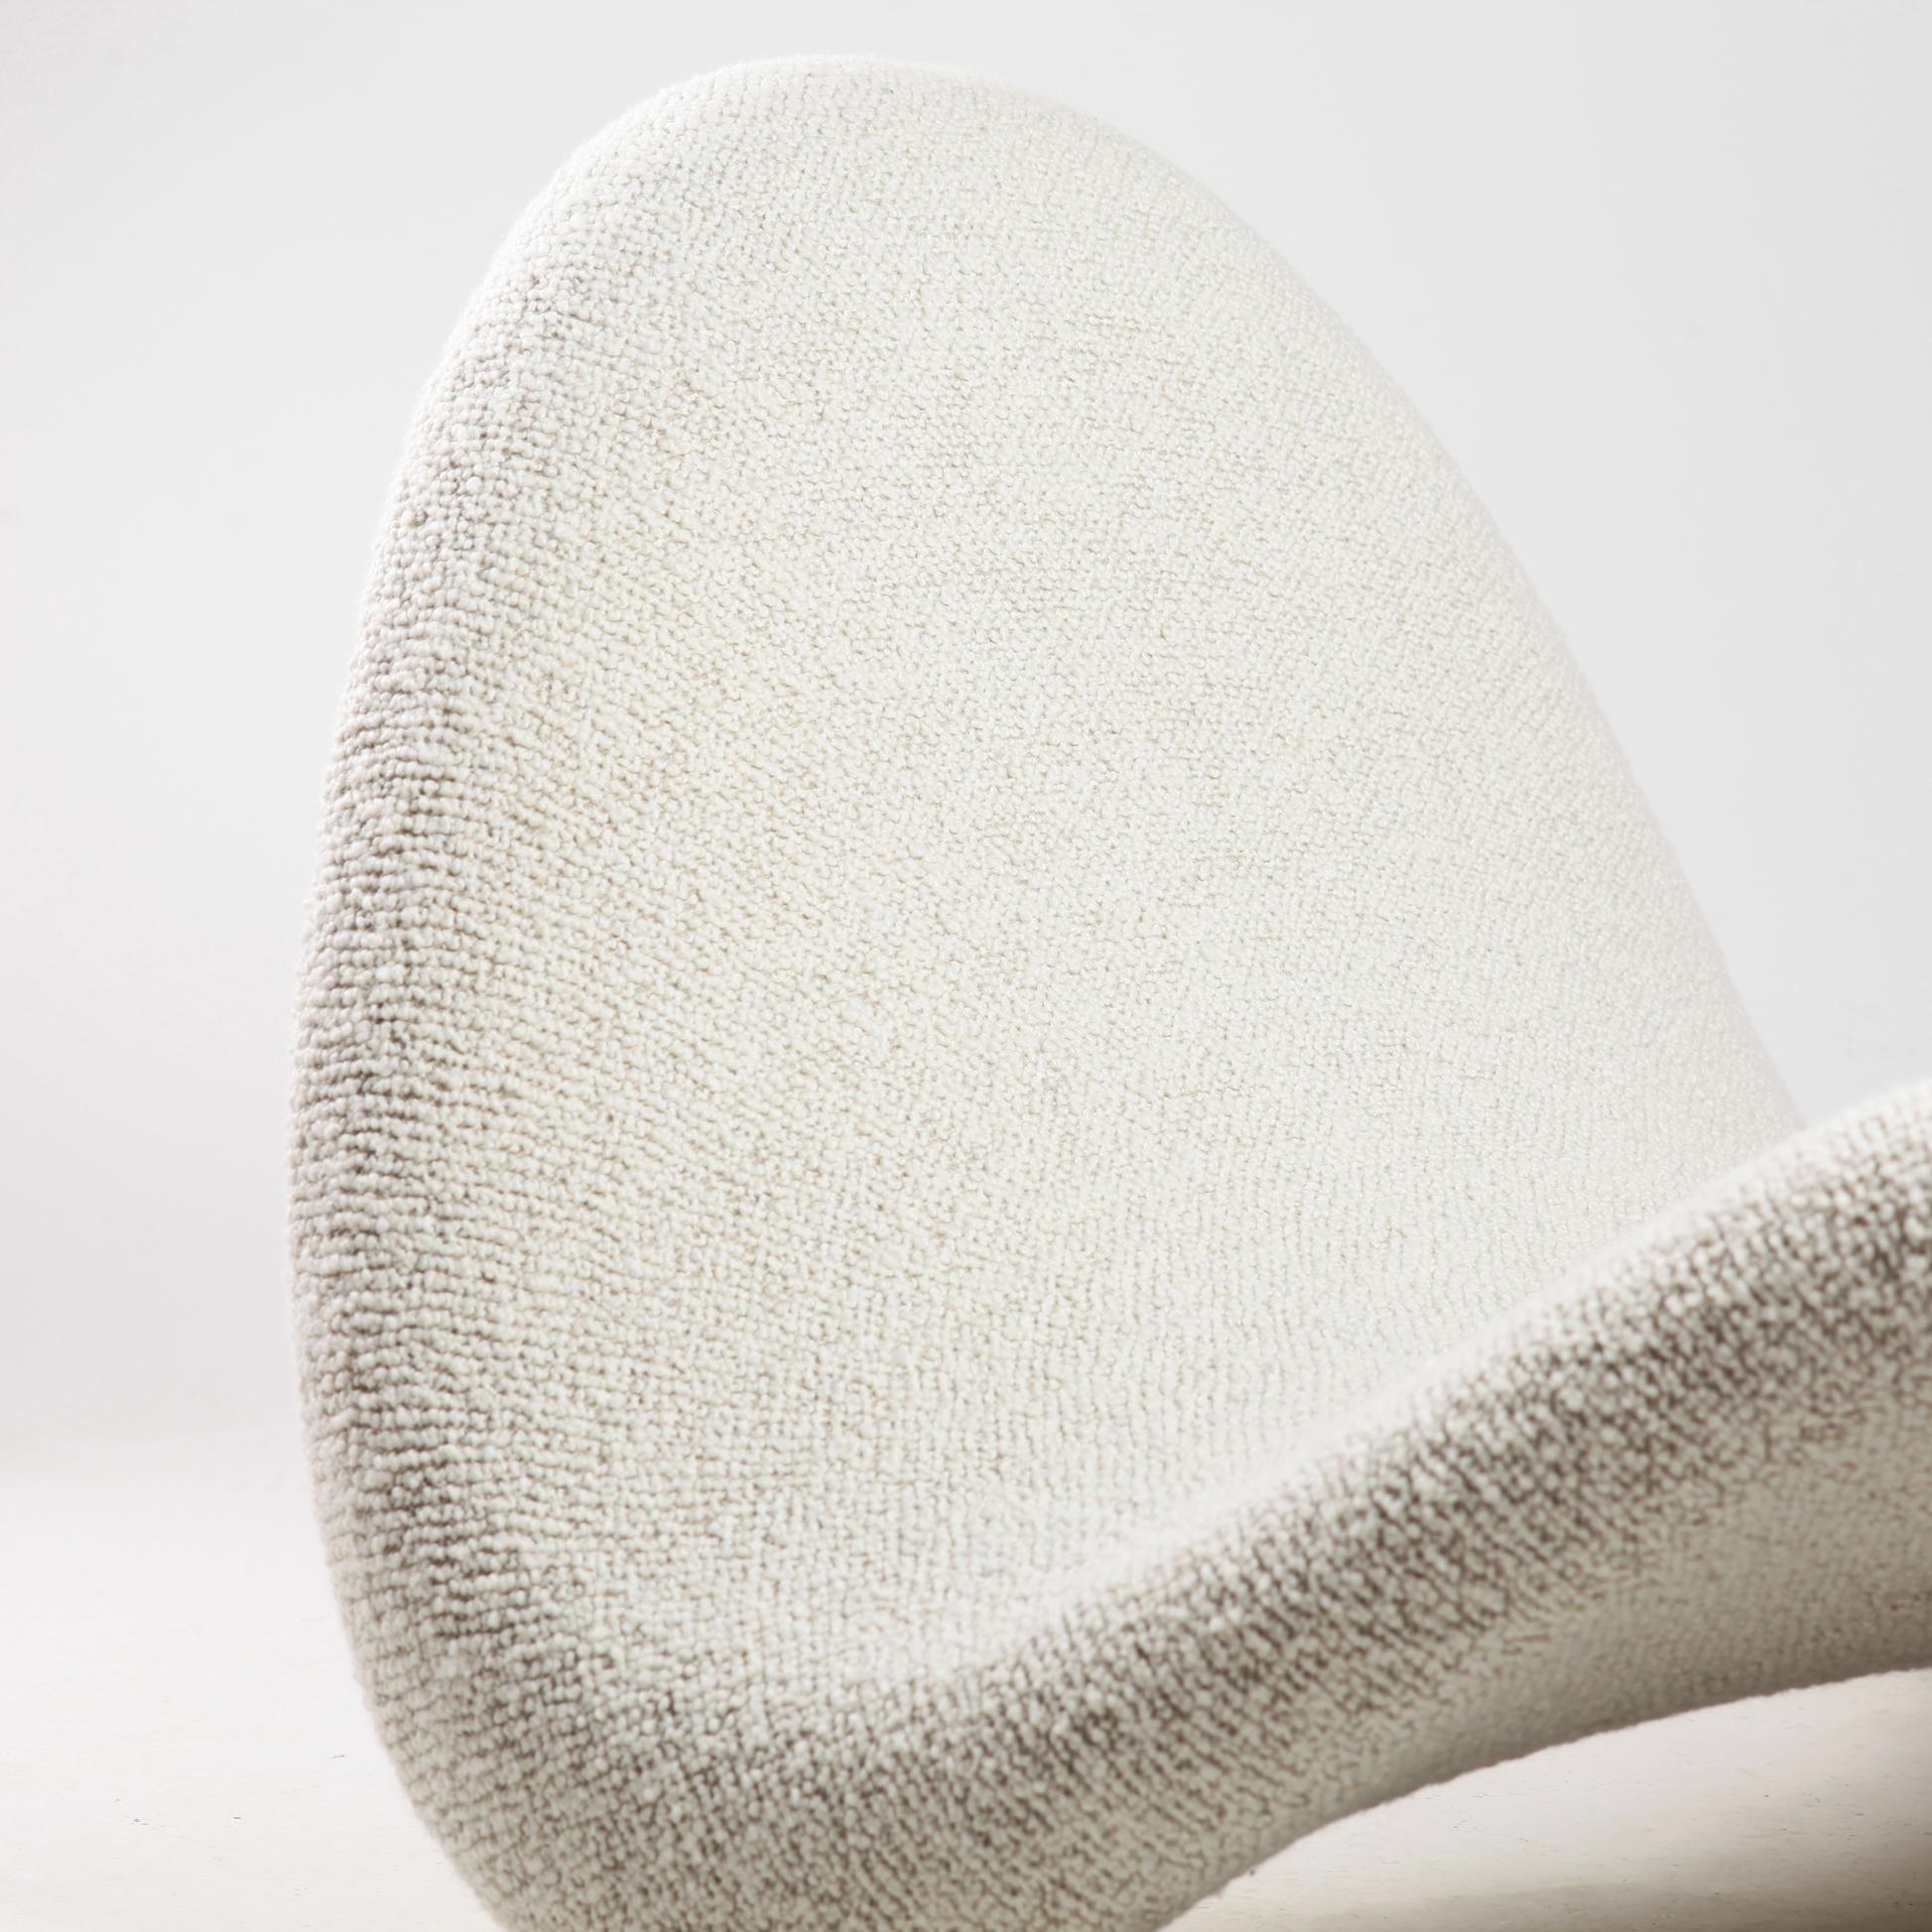 Pierre Paulin Early F577 Tongue Chair, 1960s 5